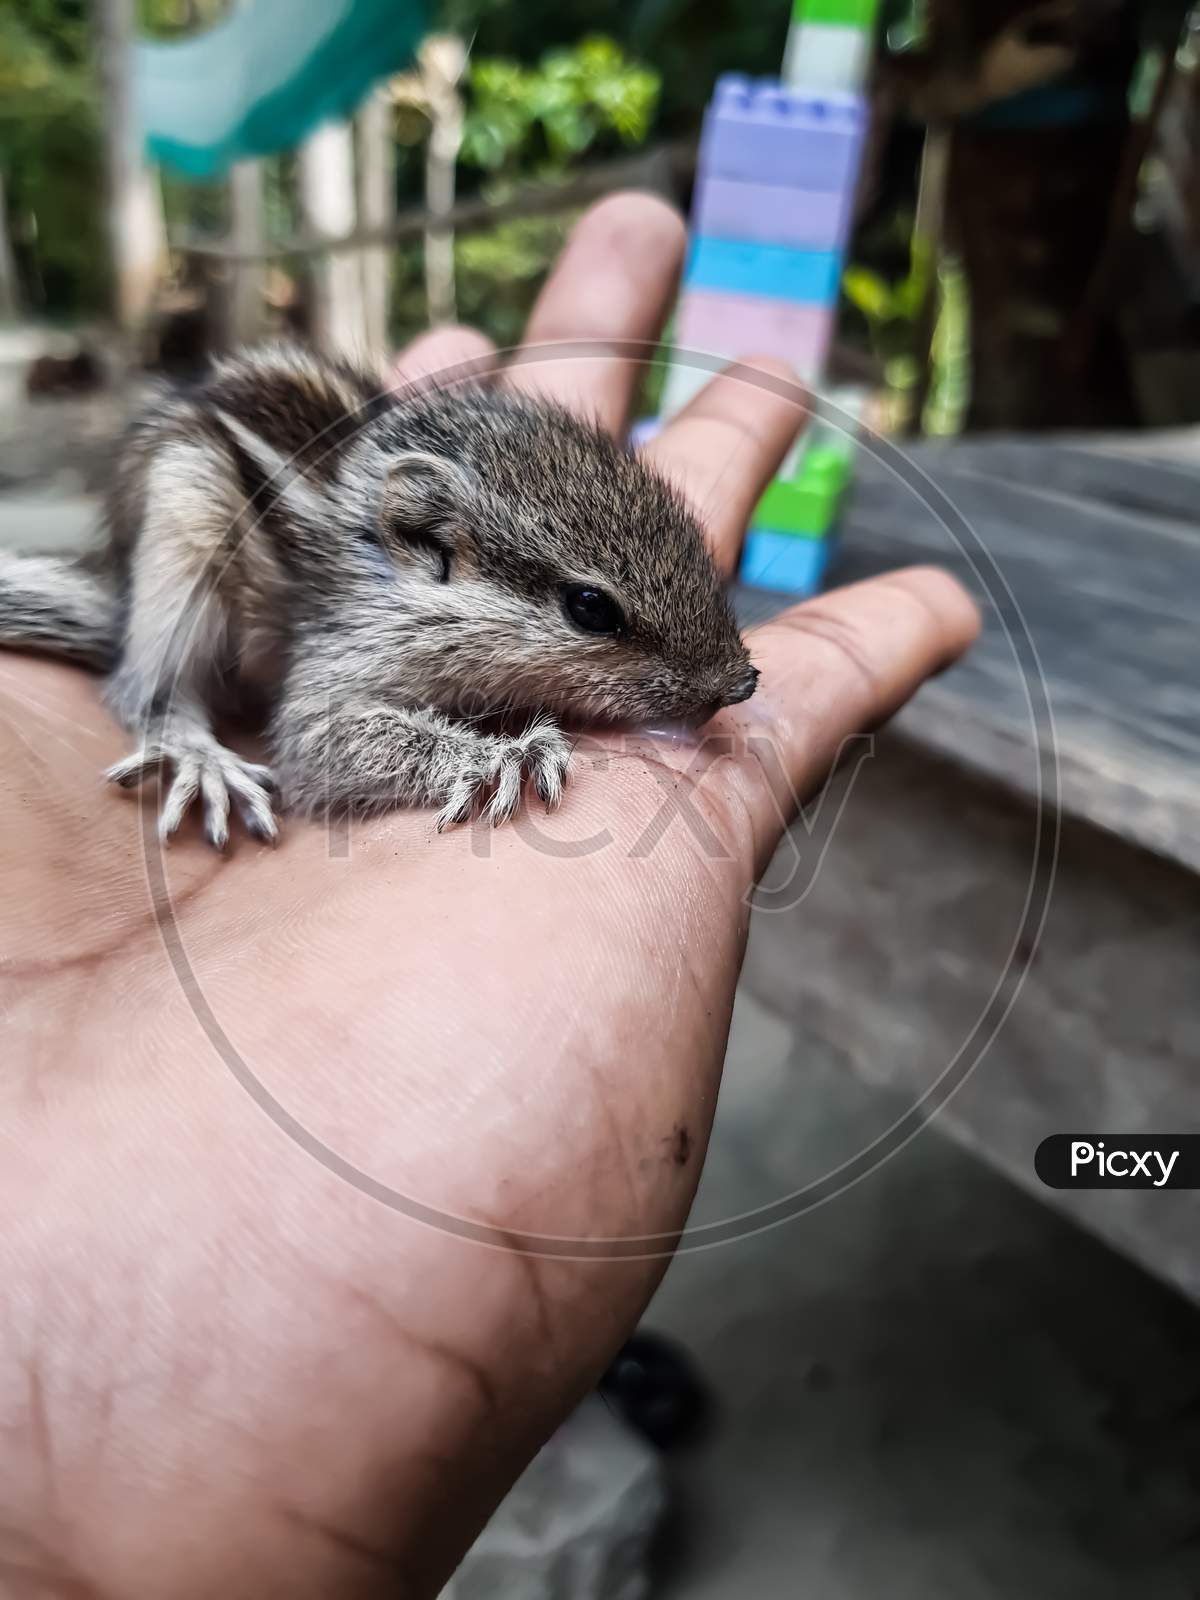 Baby Squirrel Siting On The Hand And Looking Me, How To Care For A Baby Squirrel.